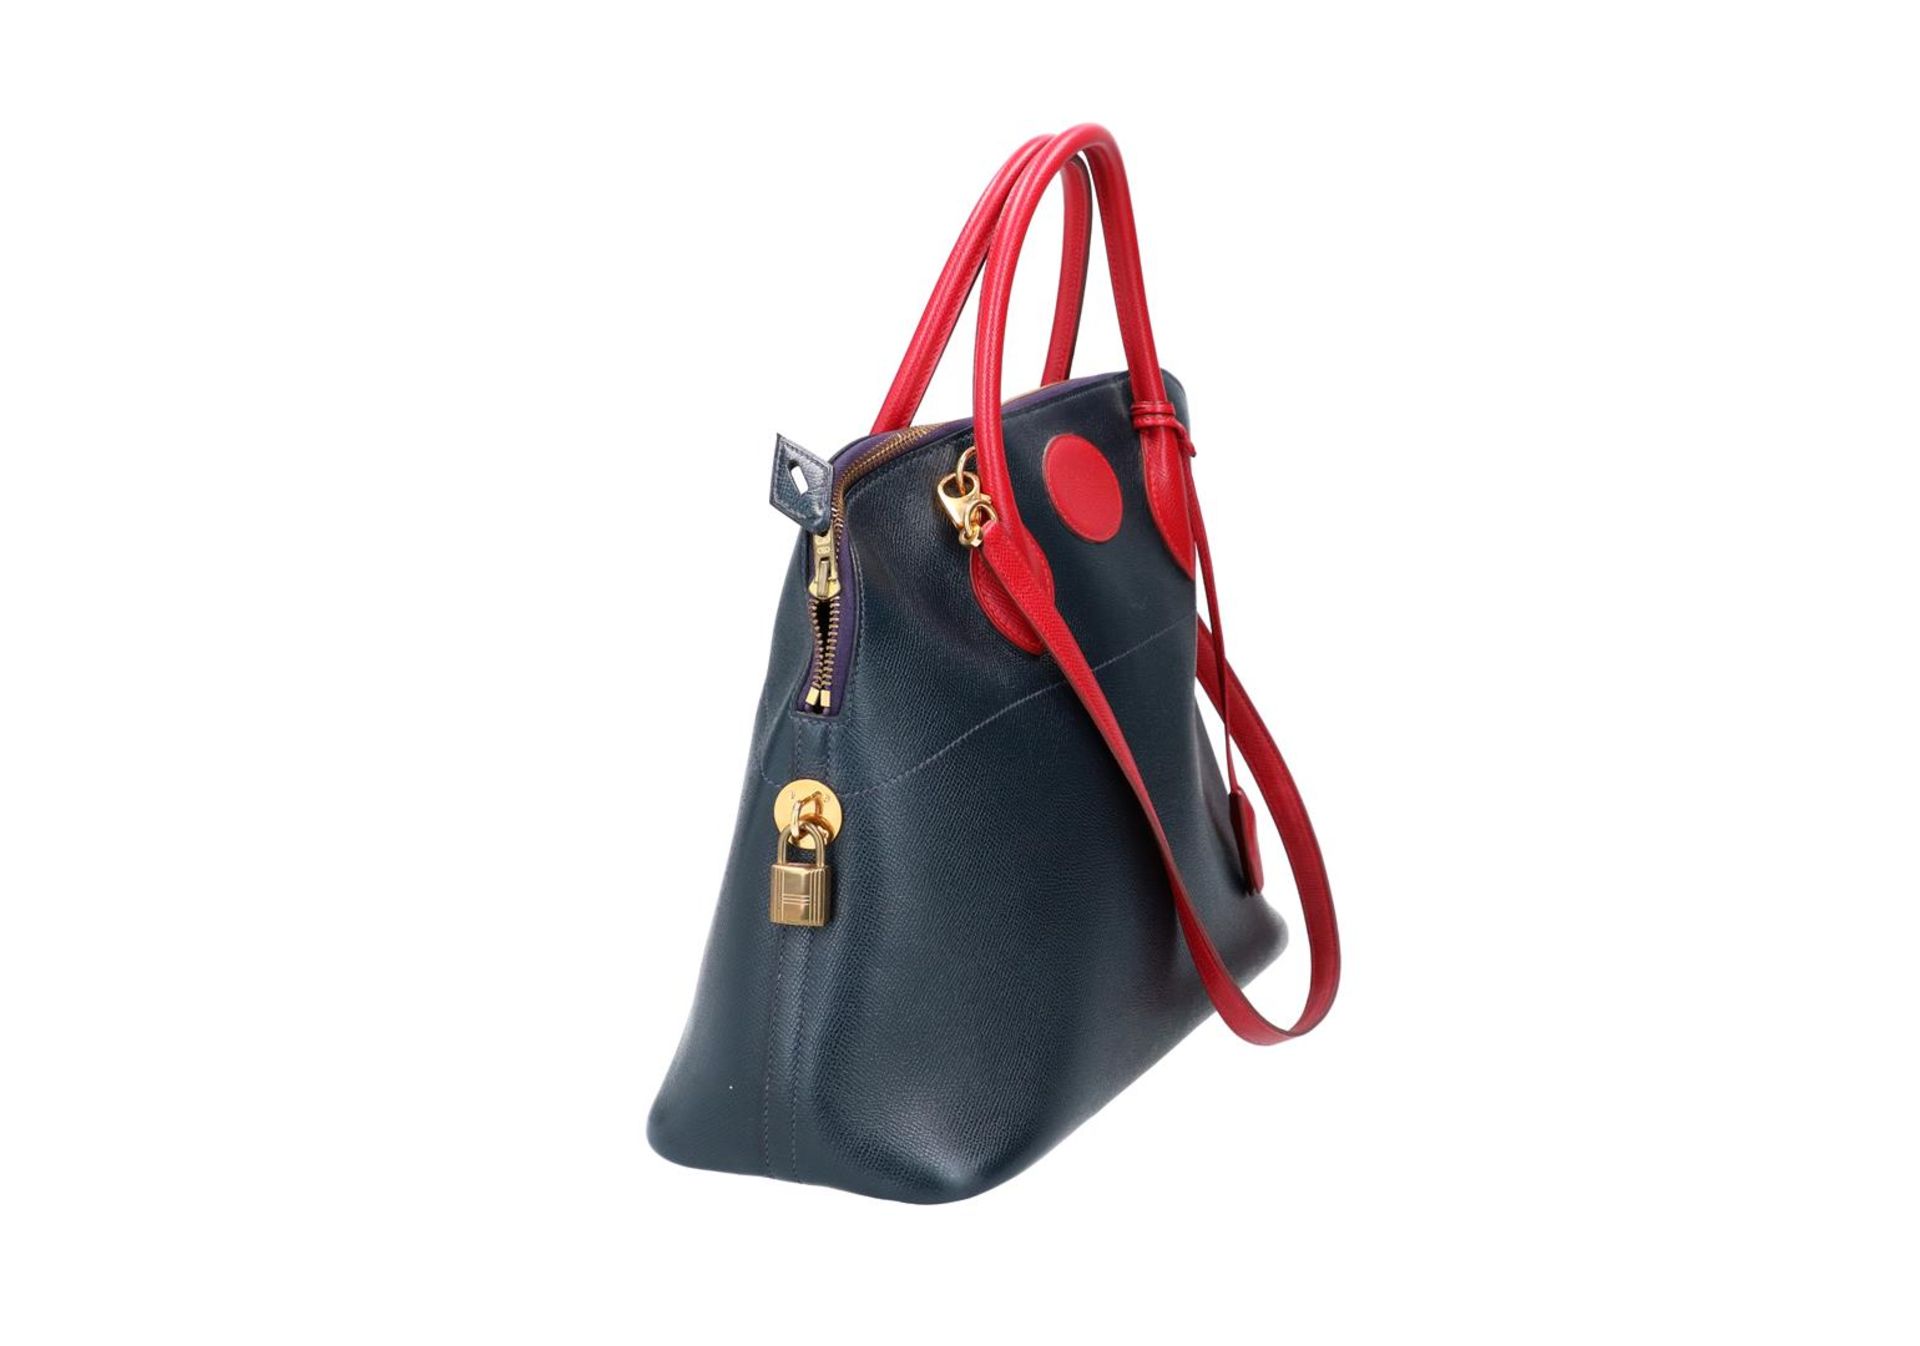 Hermes, navy blue and red handbag, 'Bolide', with lock and two keys. H x W x D: 28 x 34 x 14 cm. - Image 2 of 5